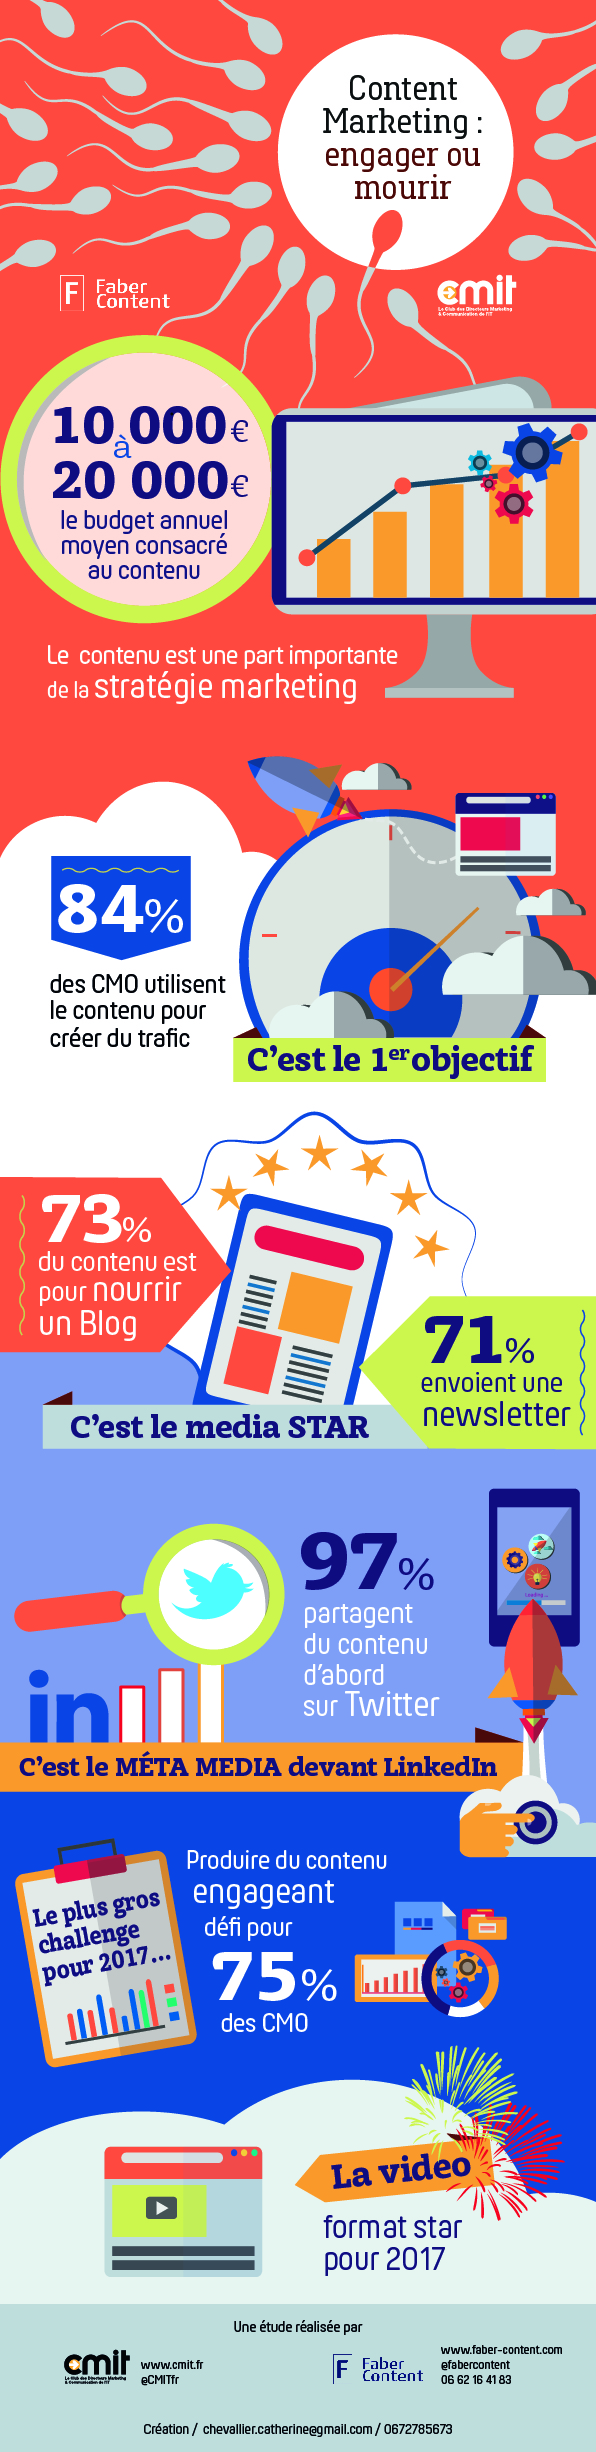 INFOGRAPHIE-CMIT_Faber-Content engager ou mourir